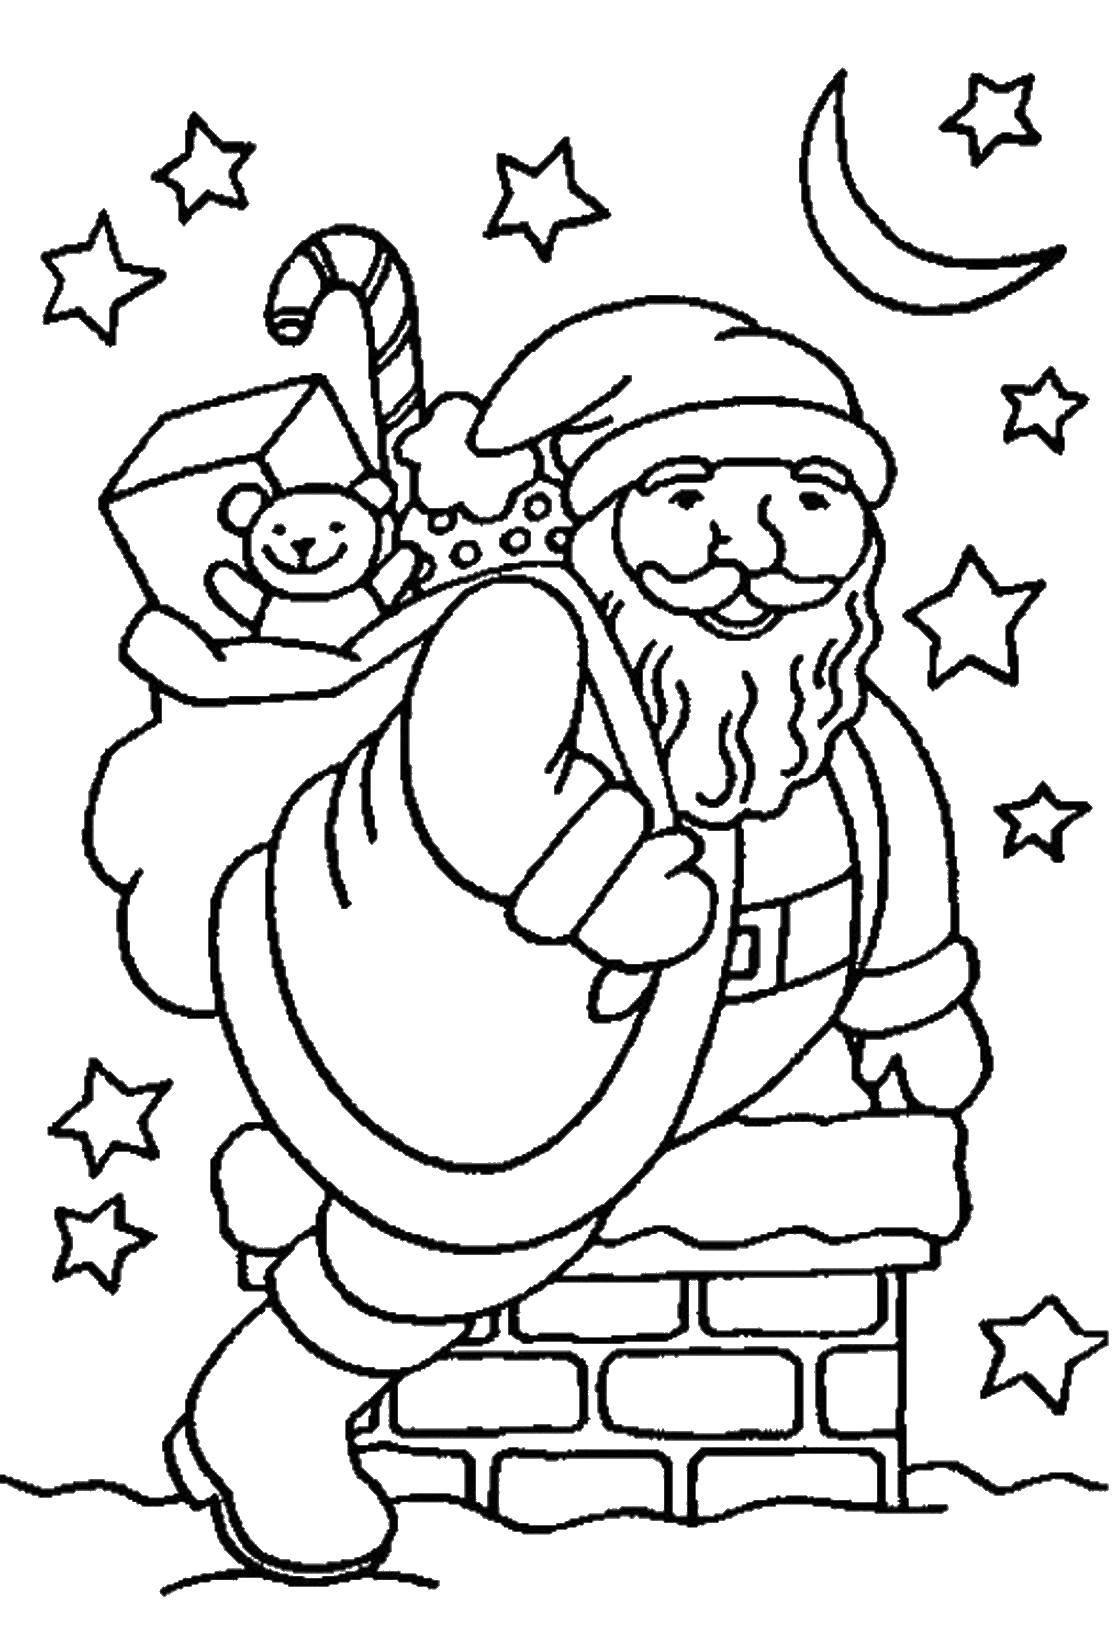 Coloring Santa Claus in the pipe. Category Christmas. Tags:  Santa Claus, pipe, gifts, bag.